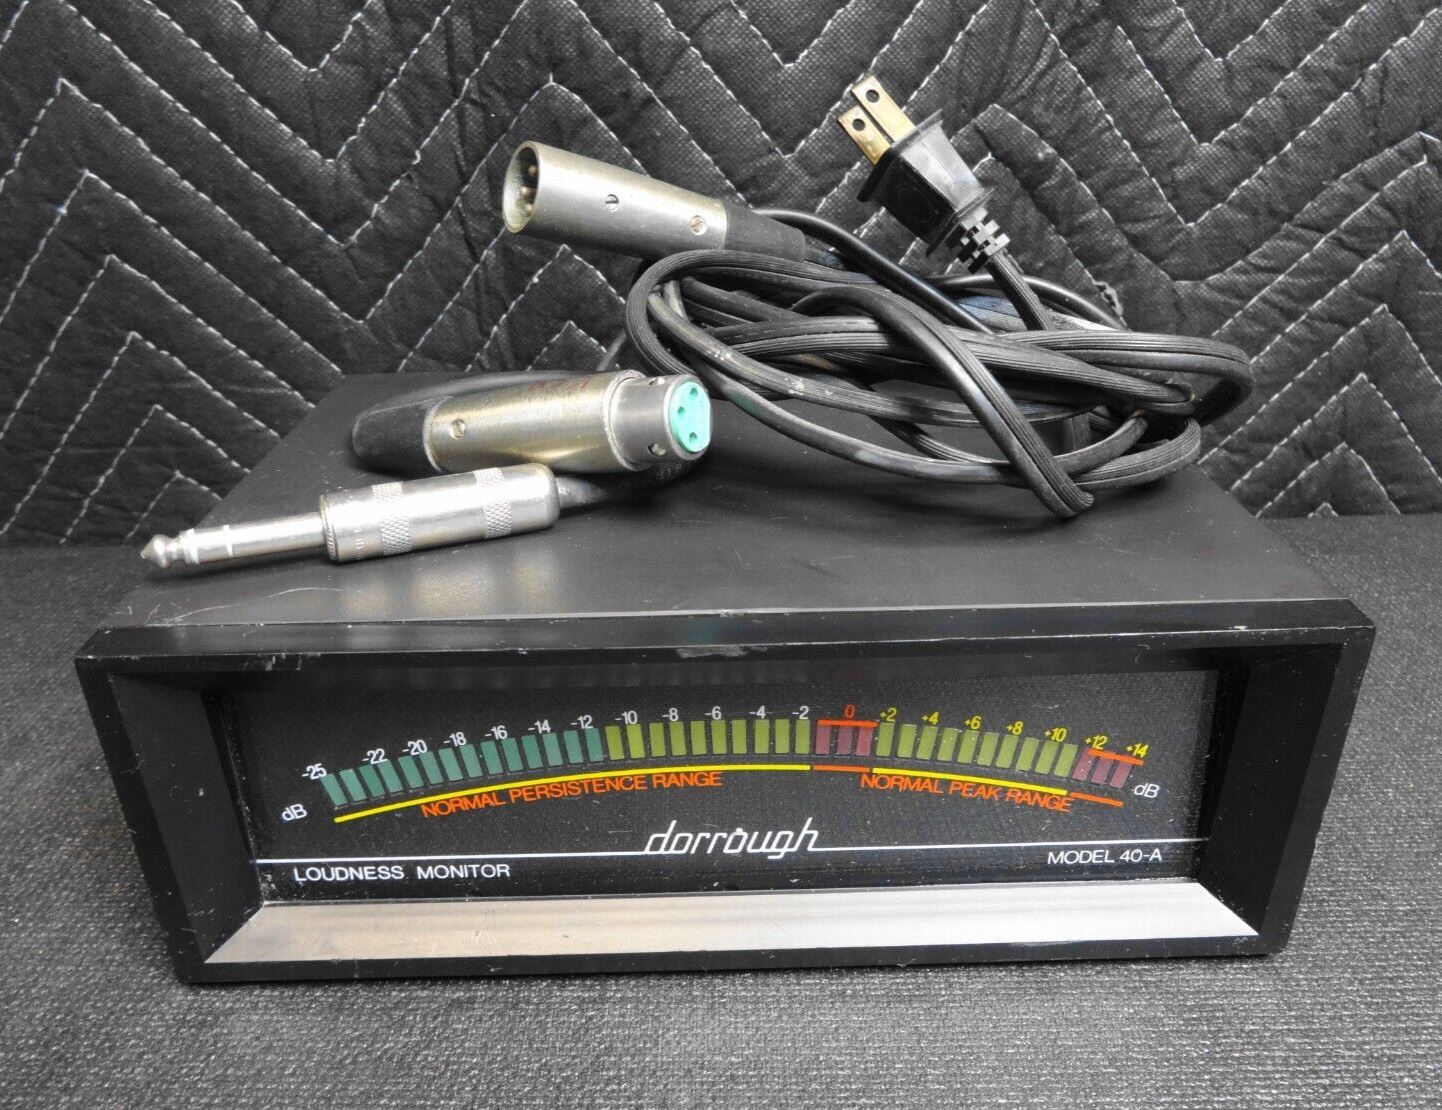 Dorrough 40-A Loudness Monitor LED Meters XLR w/ Tip & Ring Adapter